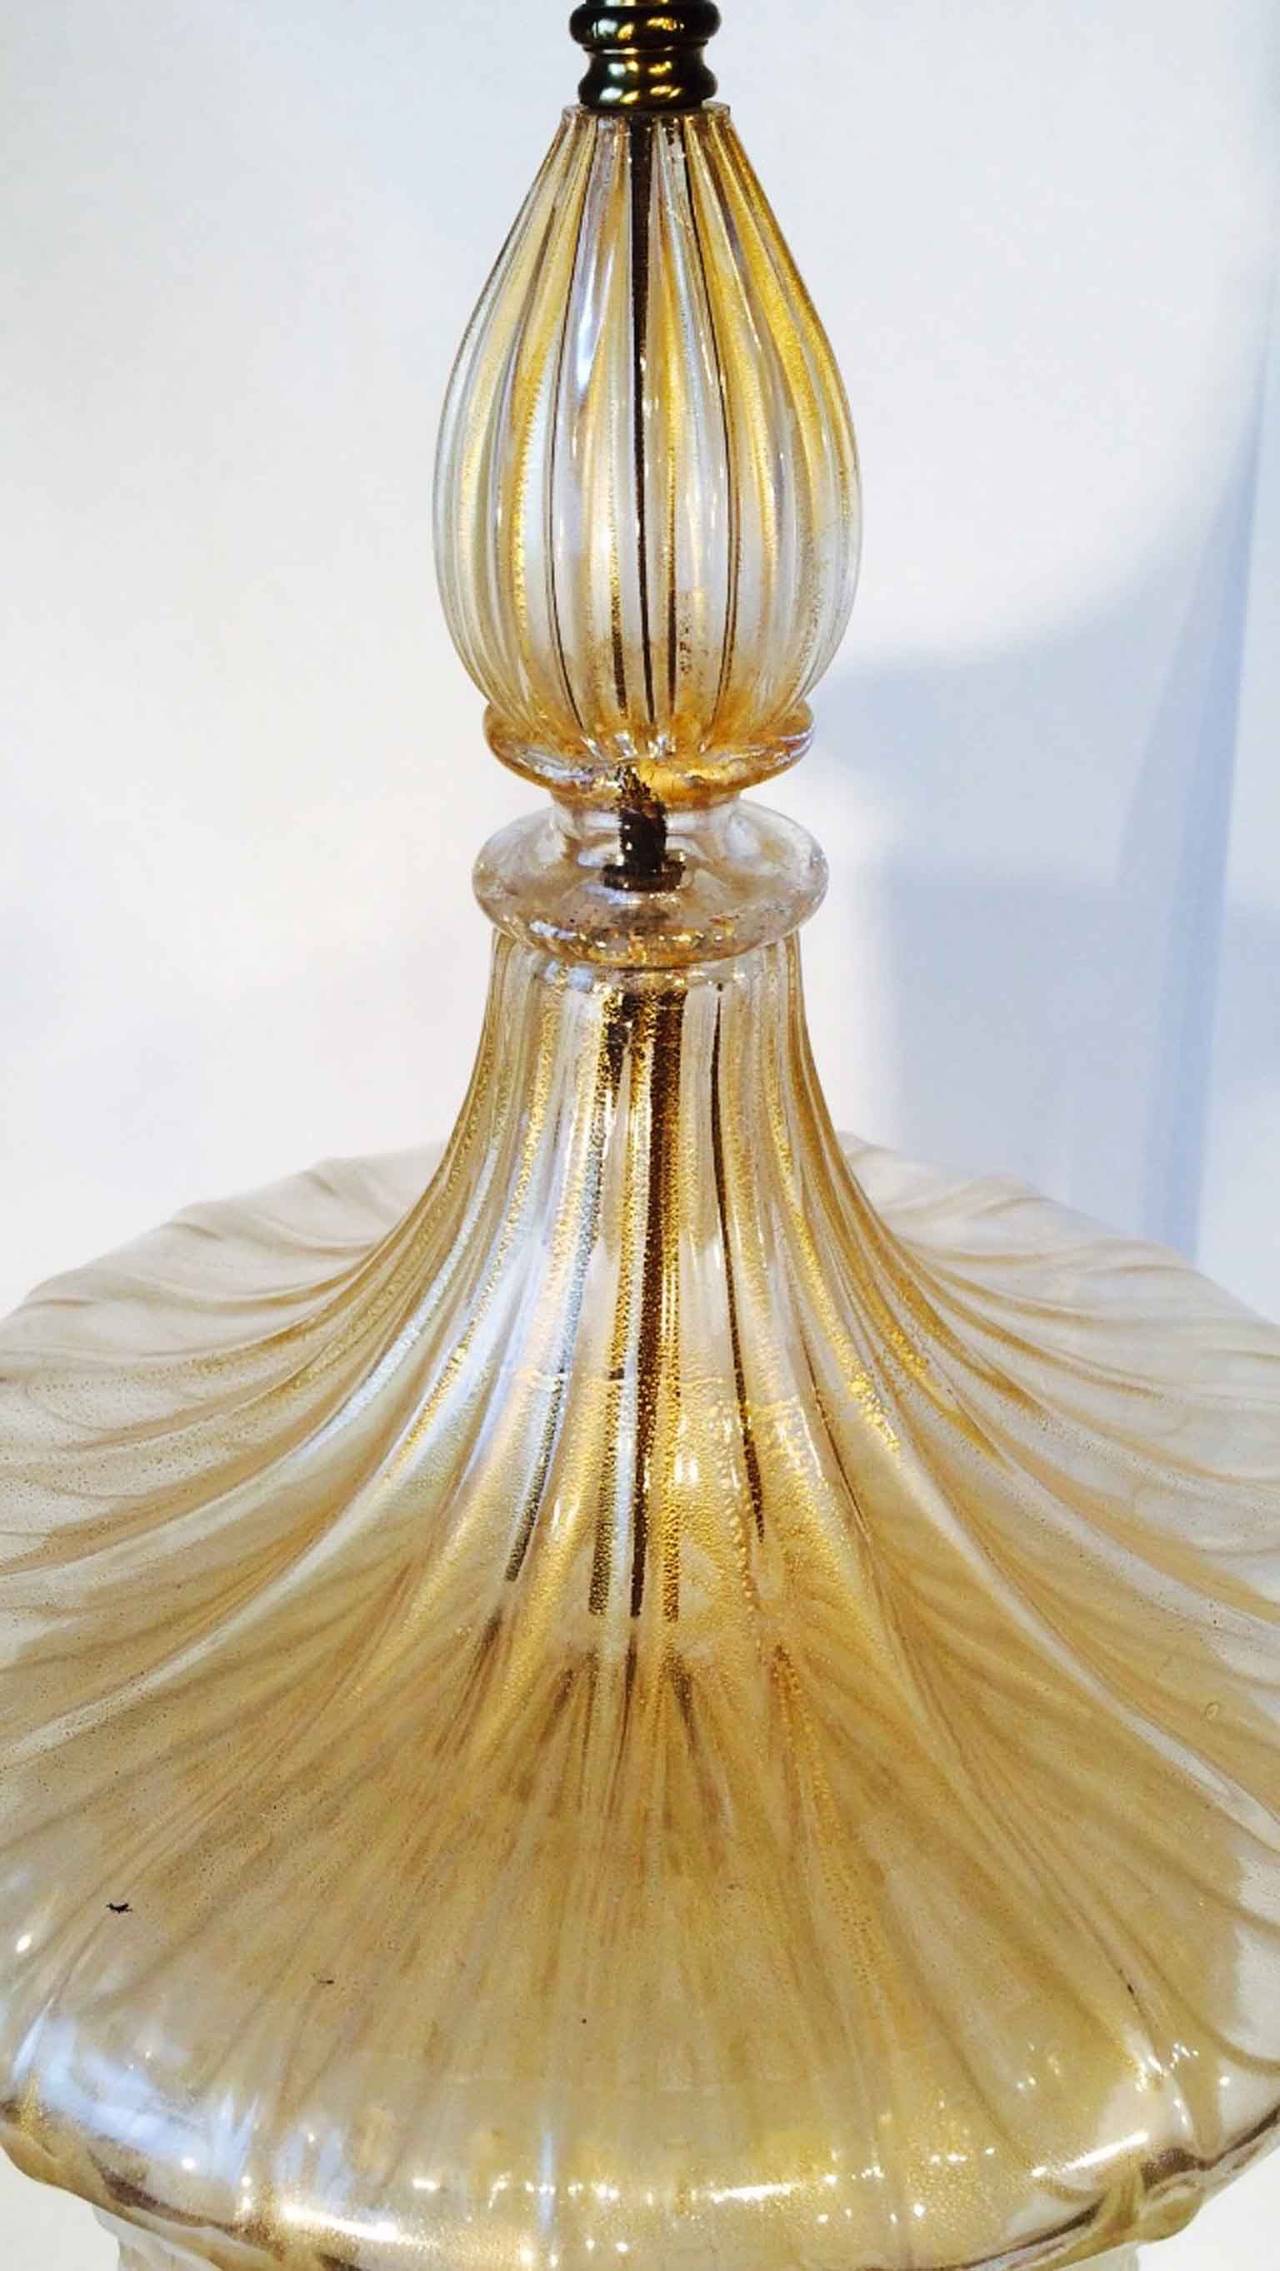 Stunning and rare pair of Barovier e Toso Murano glass lantern table lamps. Impressively large handblown glass items in clear with internal metallic gold dust. Six matched segmented glass elements mounted on a giltwood bases with polished brass